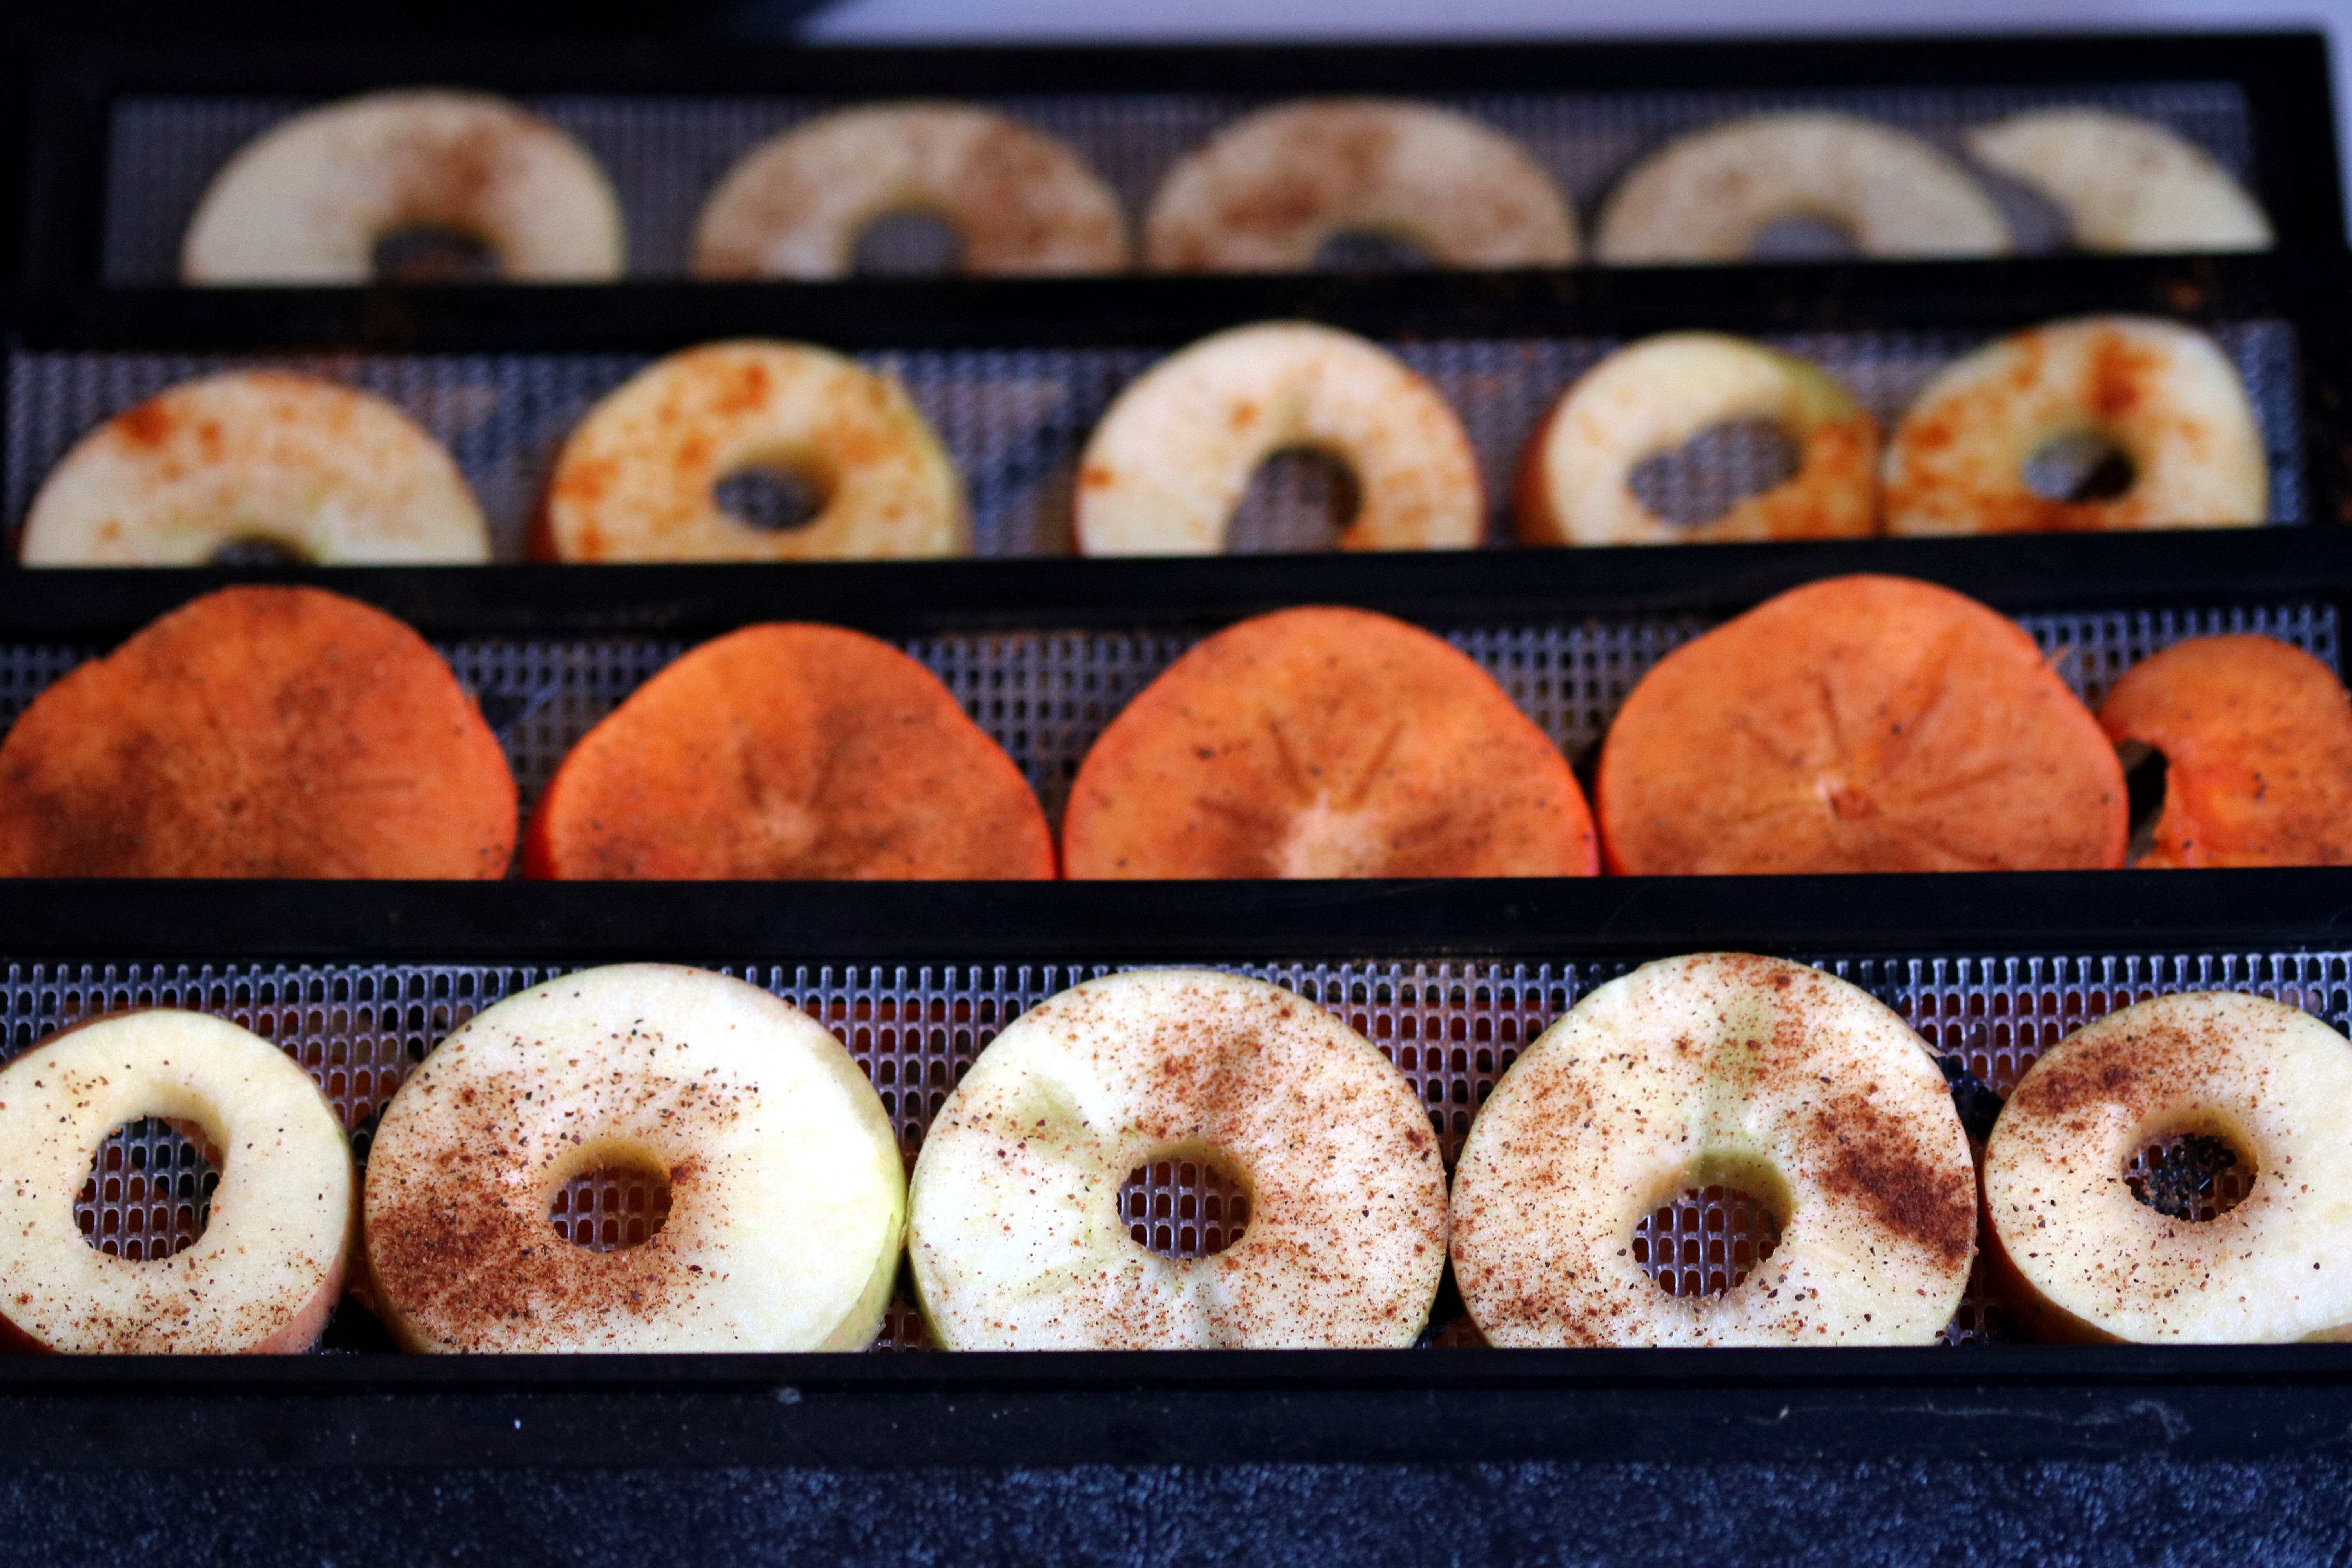 These persimmons and apples are about the get dehydrated for 8 hours and come out looking like royalty! Super easy, hands off recipe perfect for an on-the-go snack or entertainment. The full dried fruit rings recipe is on zeh blog.